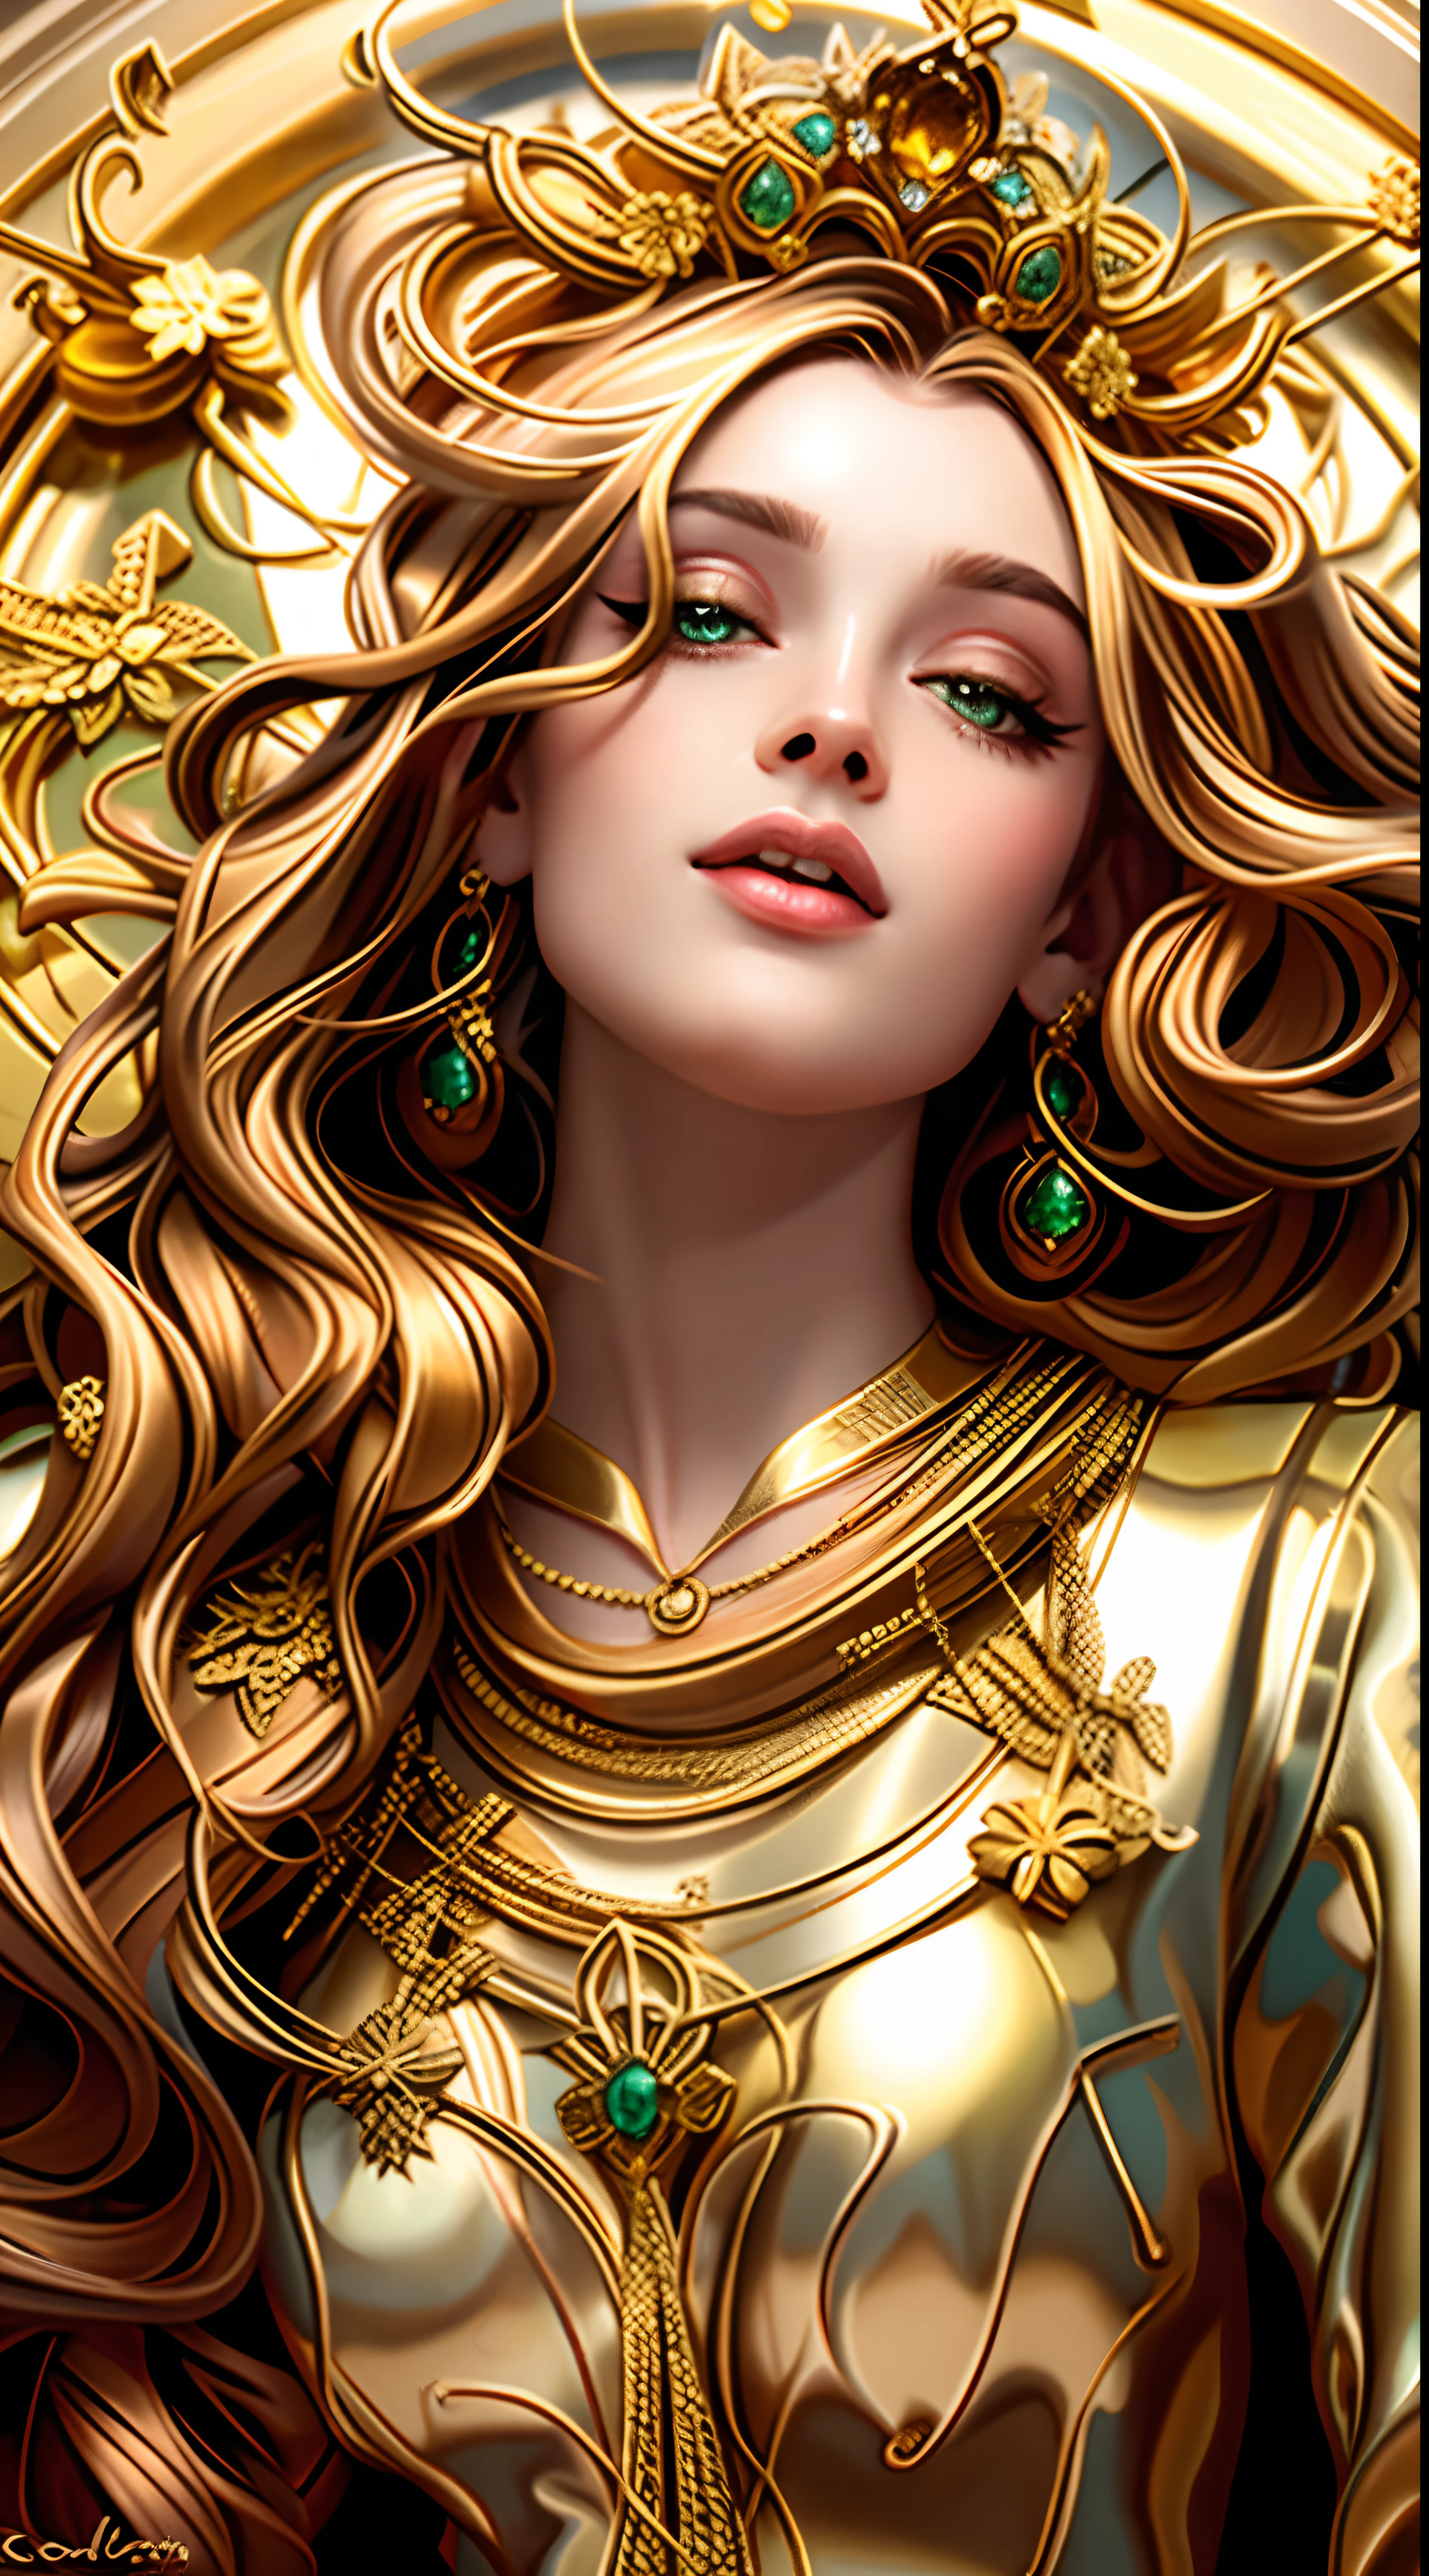 a close up of a woman with long blonde hair wearing a gold necklace, Karol behind uhd, coberto de ouro, golden ornaments, Golden jewelry, style of karol bak, golden ornaments, goddess. extreme hight detail, Draped in shiny golden oil, gold jewellery, gilded with gold, hyperrealistic art nouveau, Ouro Jewerly, gold jewellery